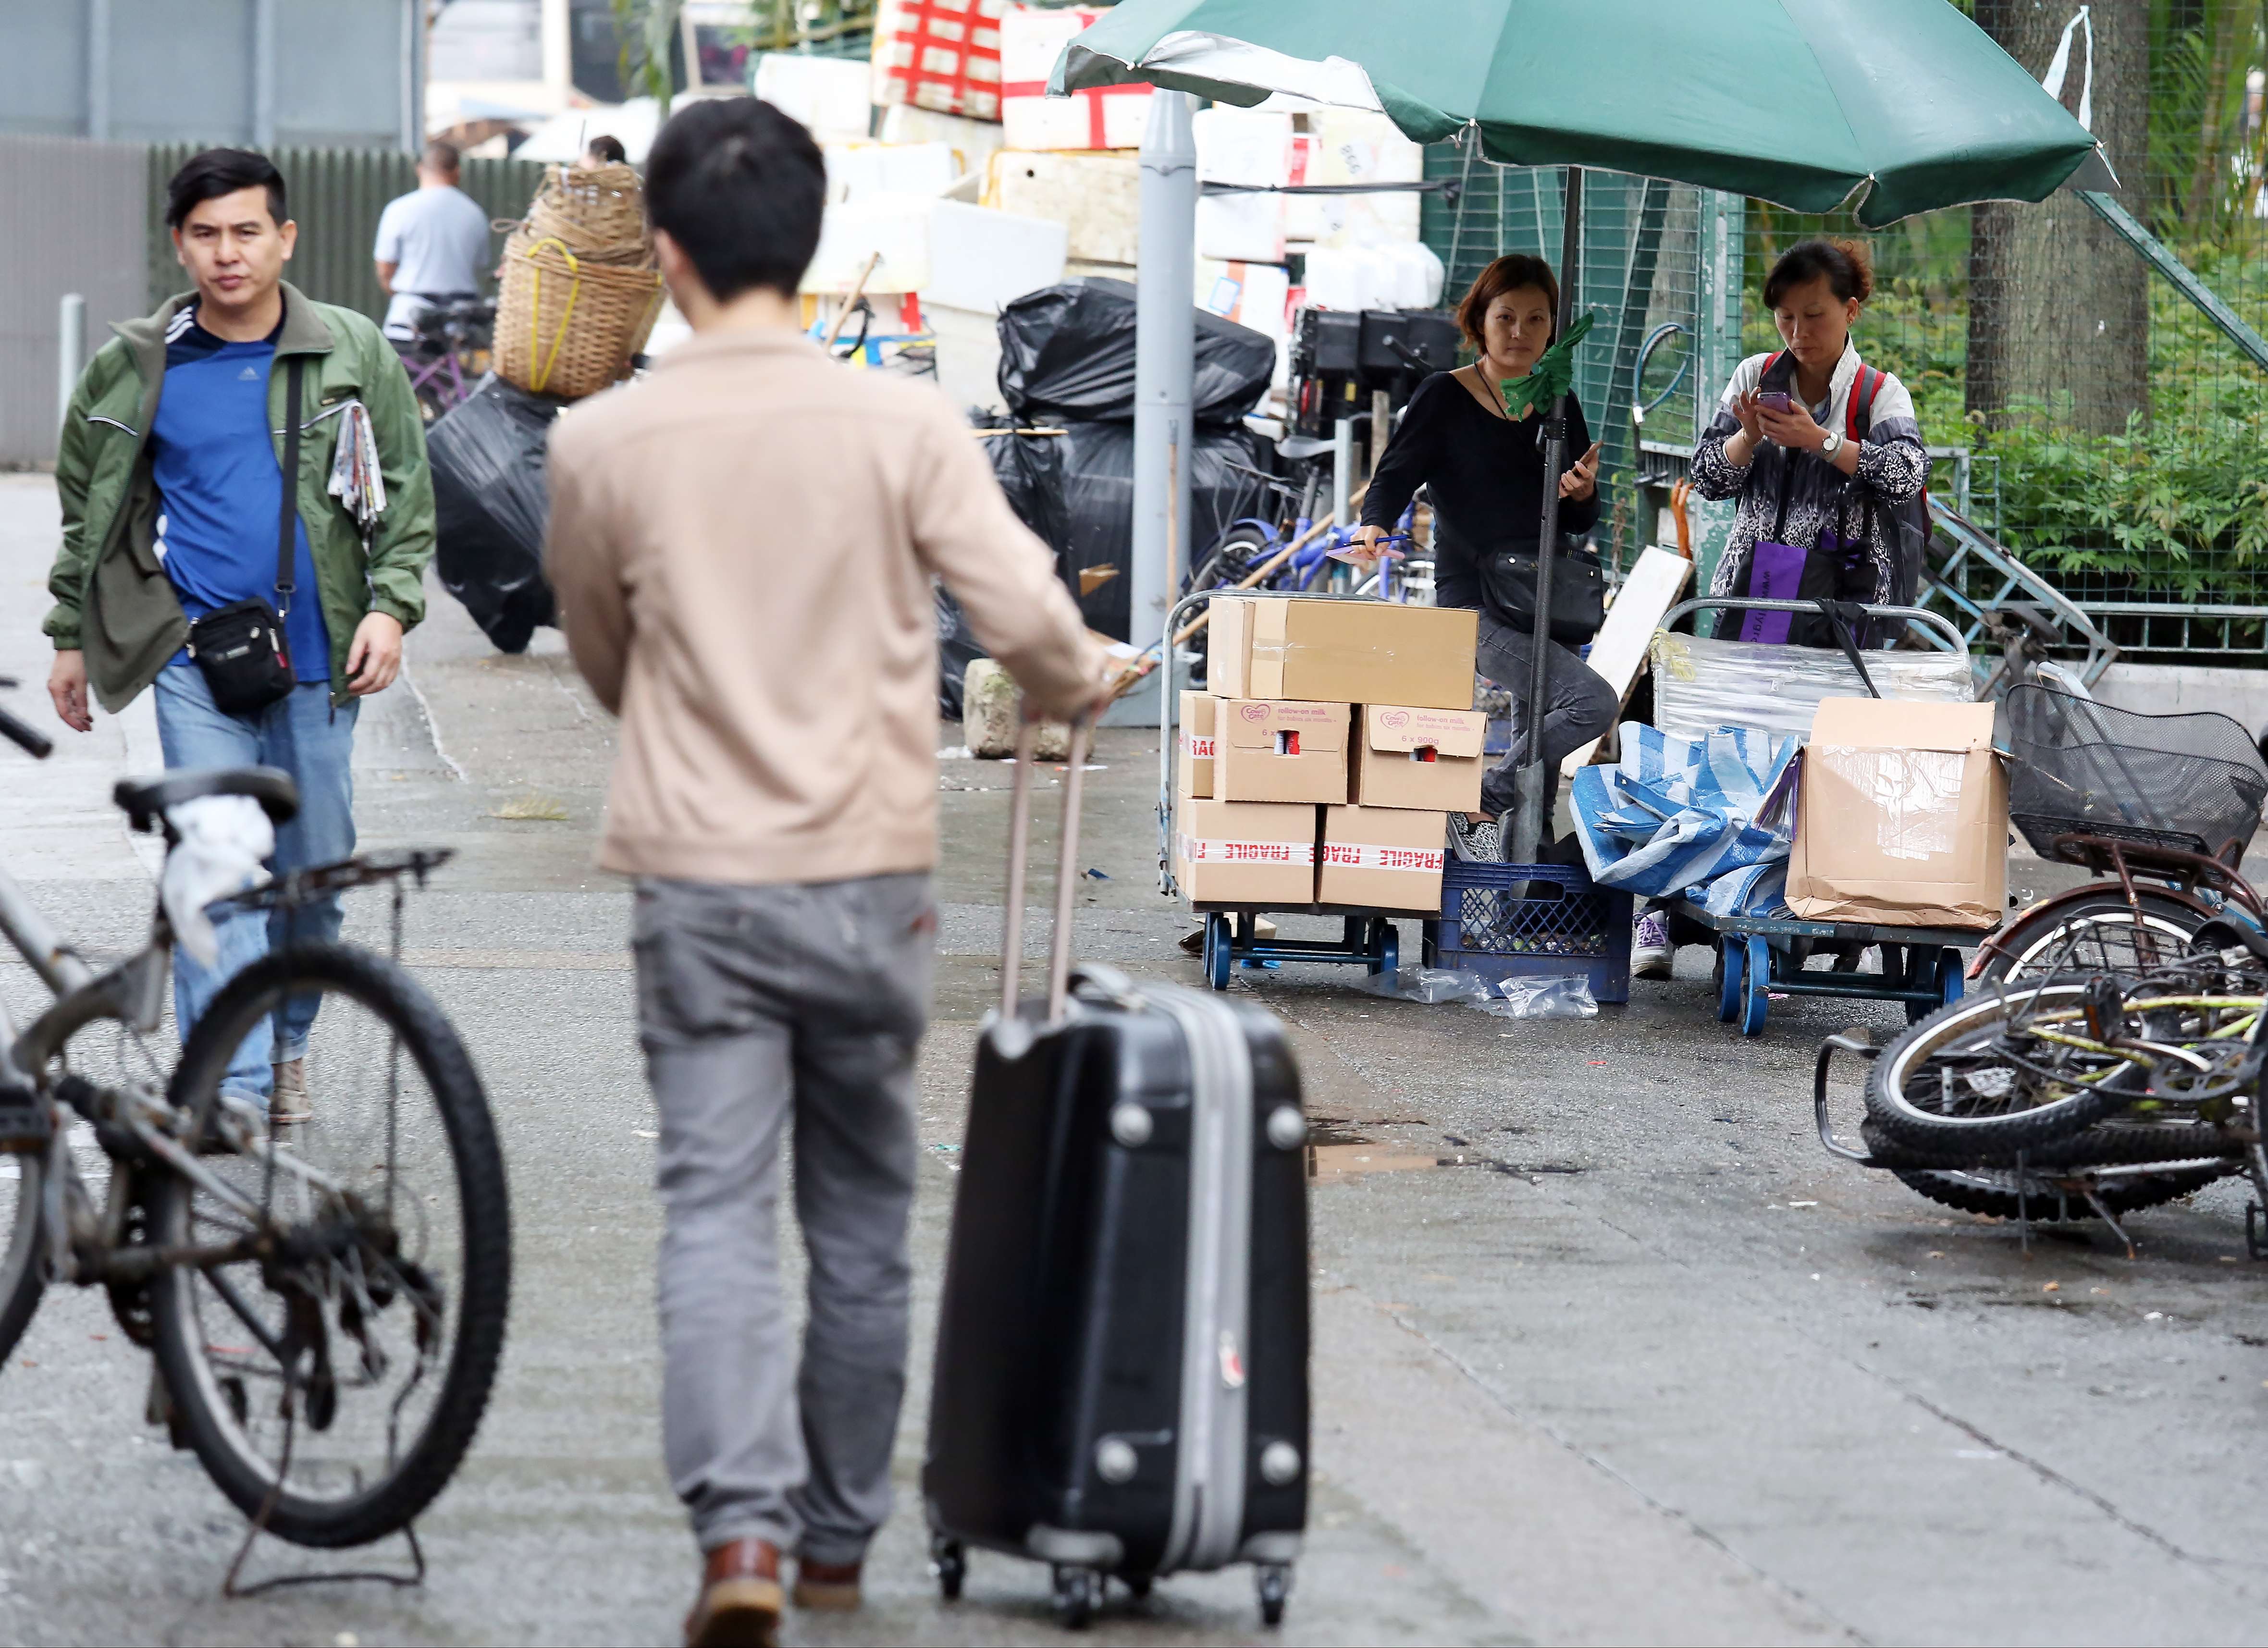 Suspected illegal goods trading activities is seen at the Sheung Shui. Large numbers of people send goods across the borders between Hong Kong and China. 15APR16 SCMP/ Nora Tam